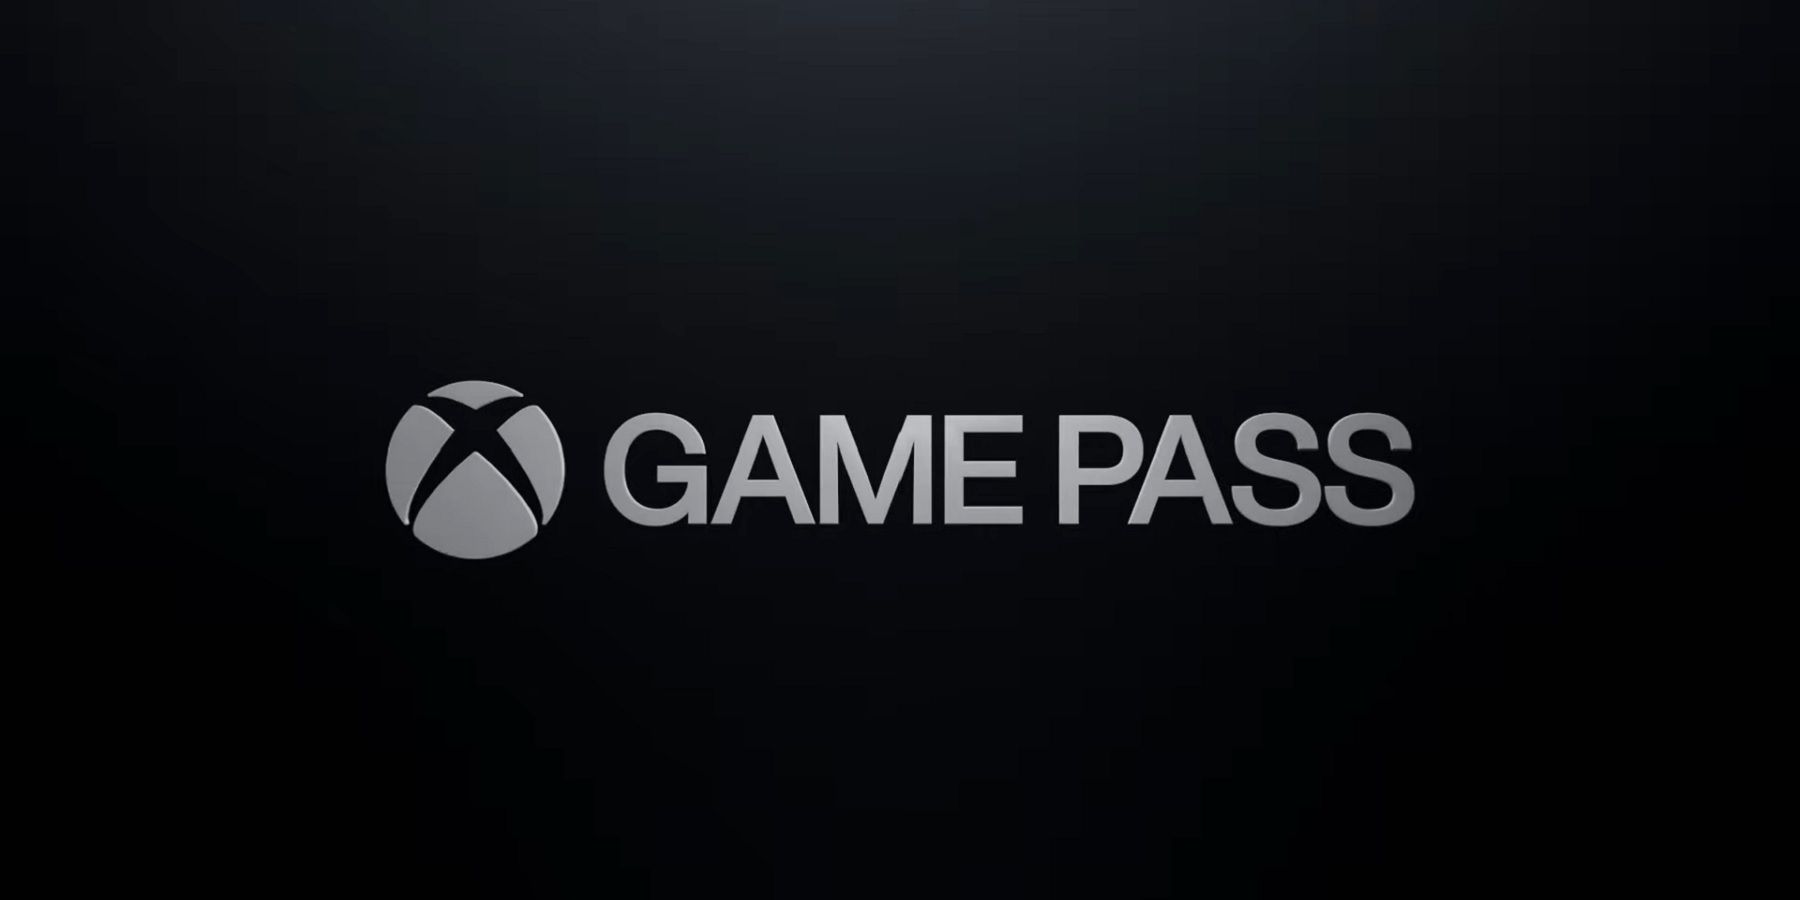 Xbox Game Pass July Titles Revealed - GameSpot